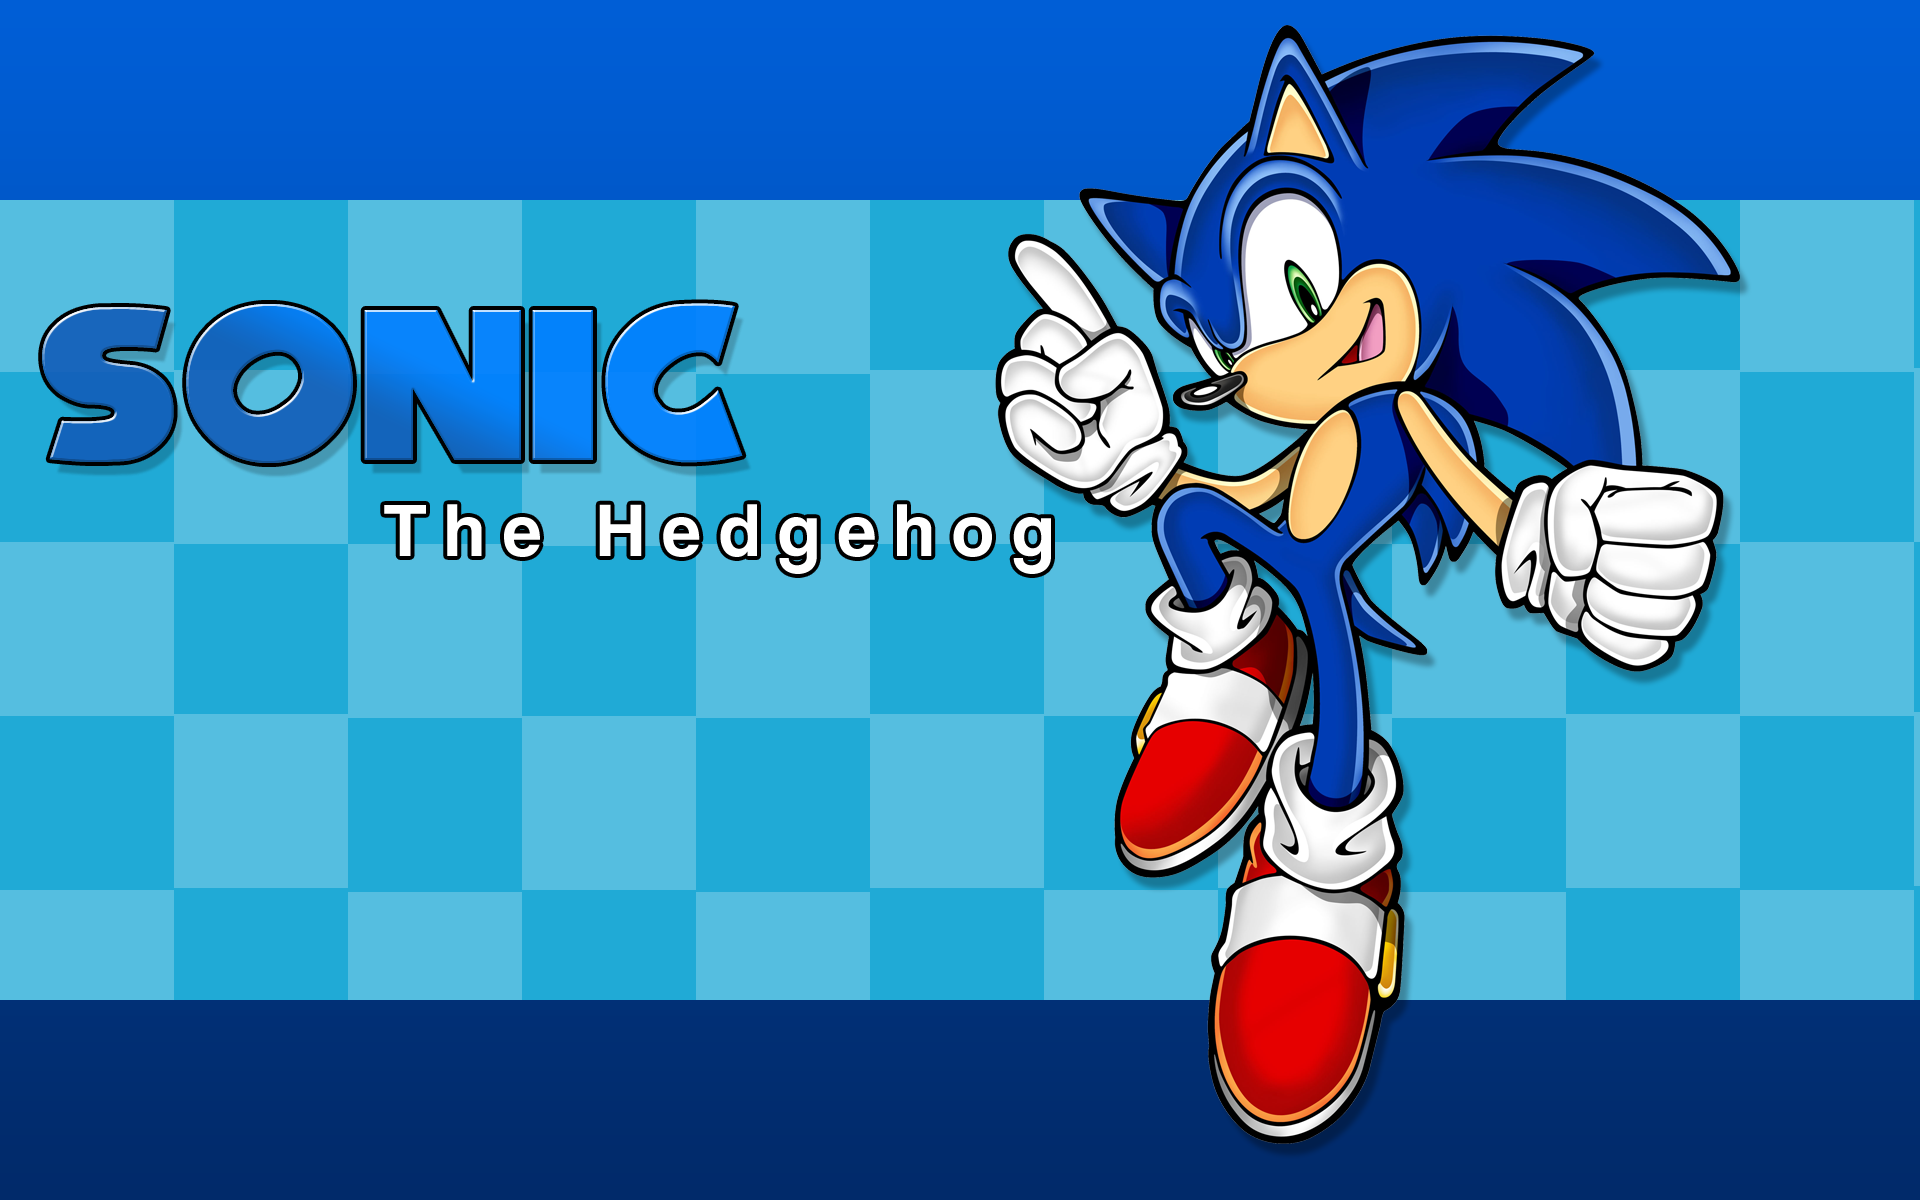 Sonic The Hedgehog Background Png & Free Sonic The Hedgehog Background.png Transparent Image